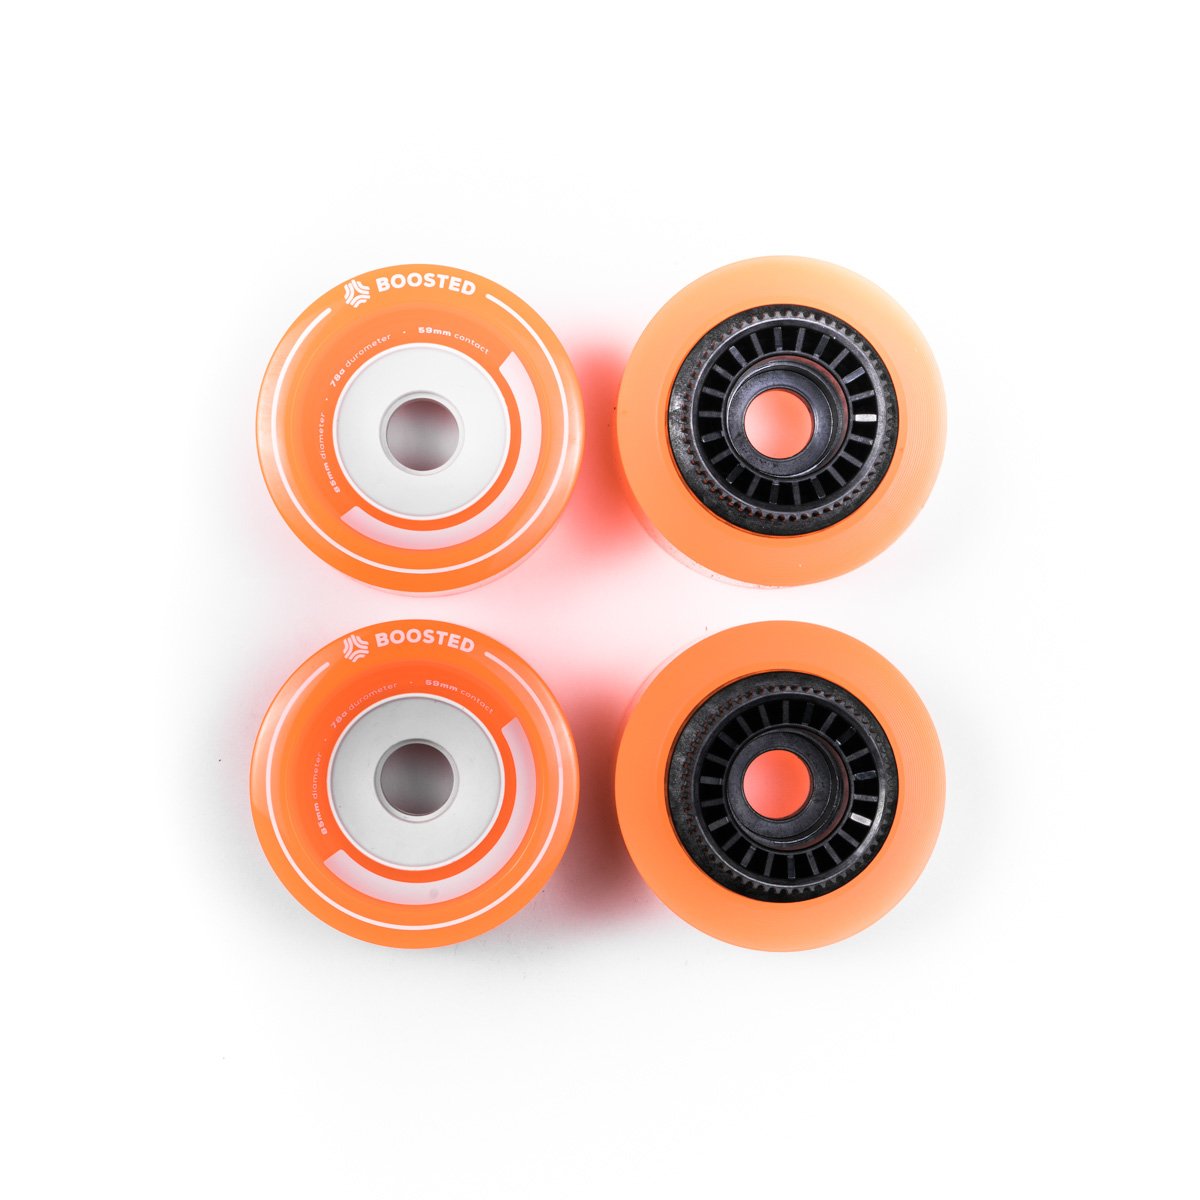 Boosted Lunar Wheels - 80mm - Grey (Set of 4 / 2 front & 2 drive) Boosted Boards spent countless hours studying different core geometries and flex profiles to design a wheel with the right combination of grip, flex, and rebound. With 80mm options, these wheels deliver the highest roll speed of any Boosted board to date. Ride like the wind.